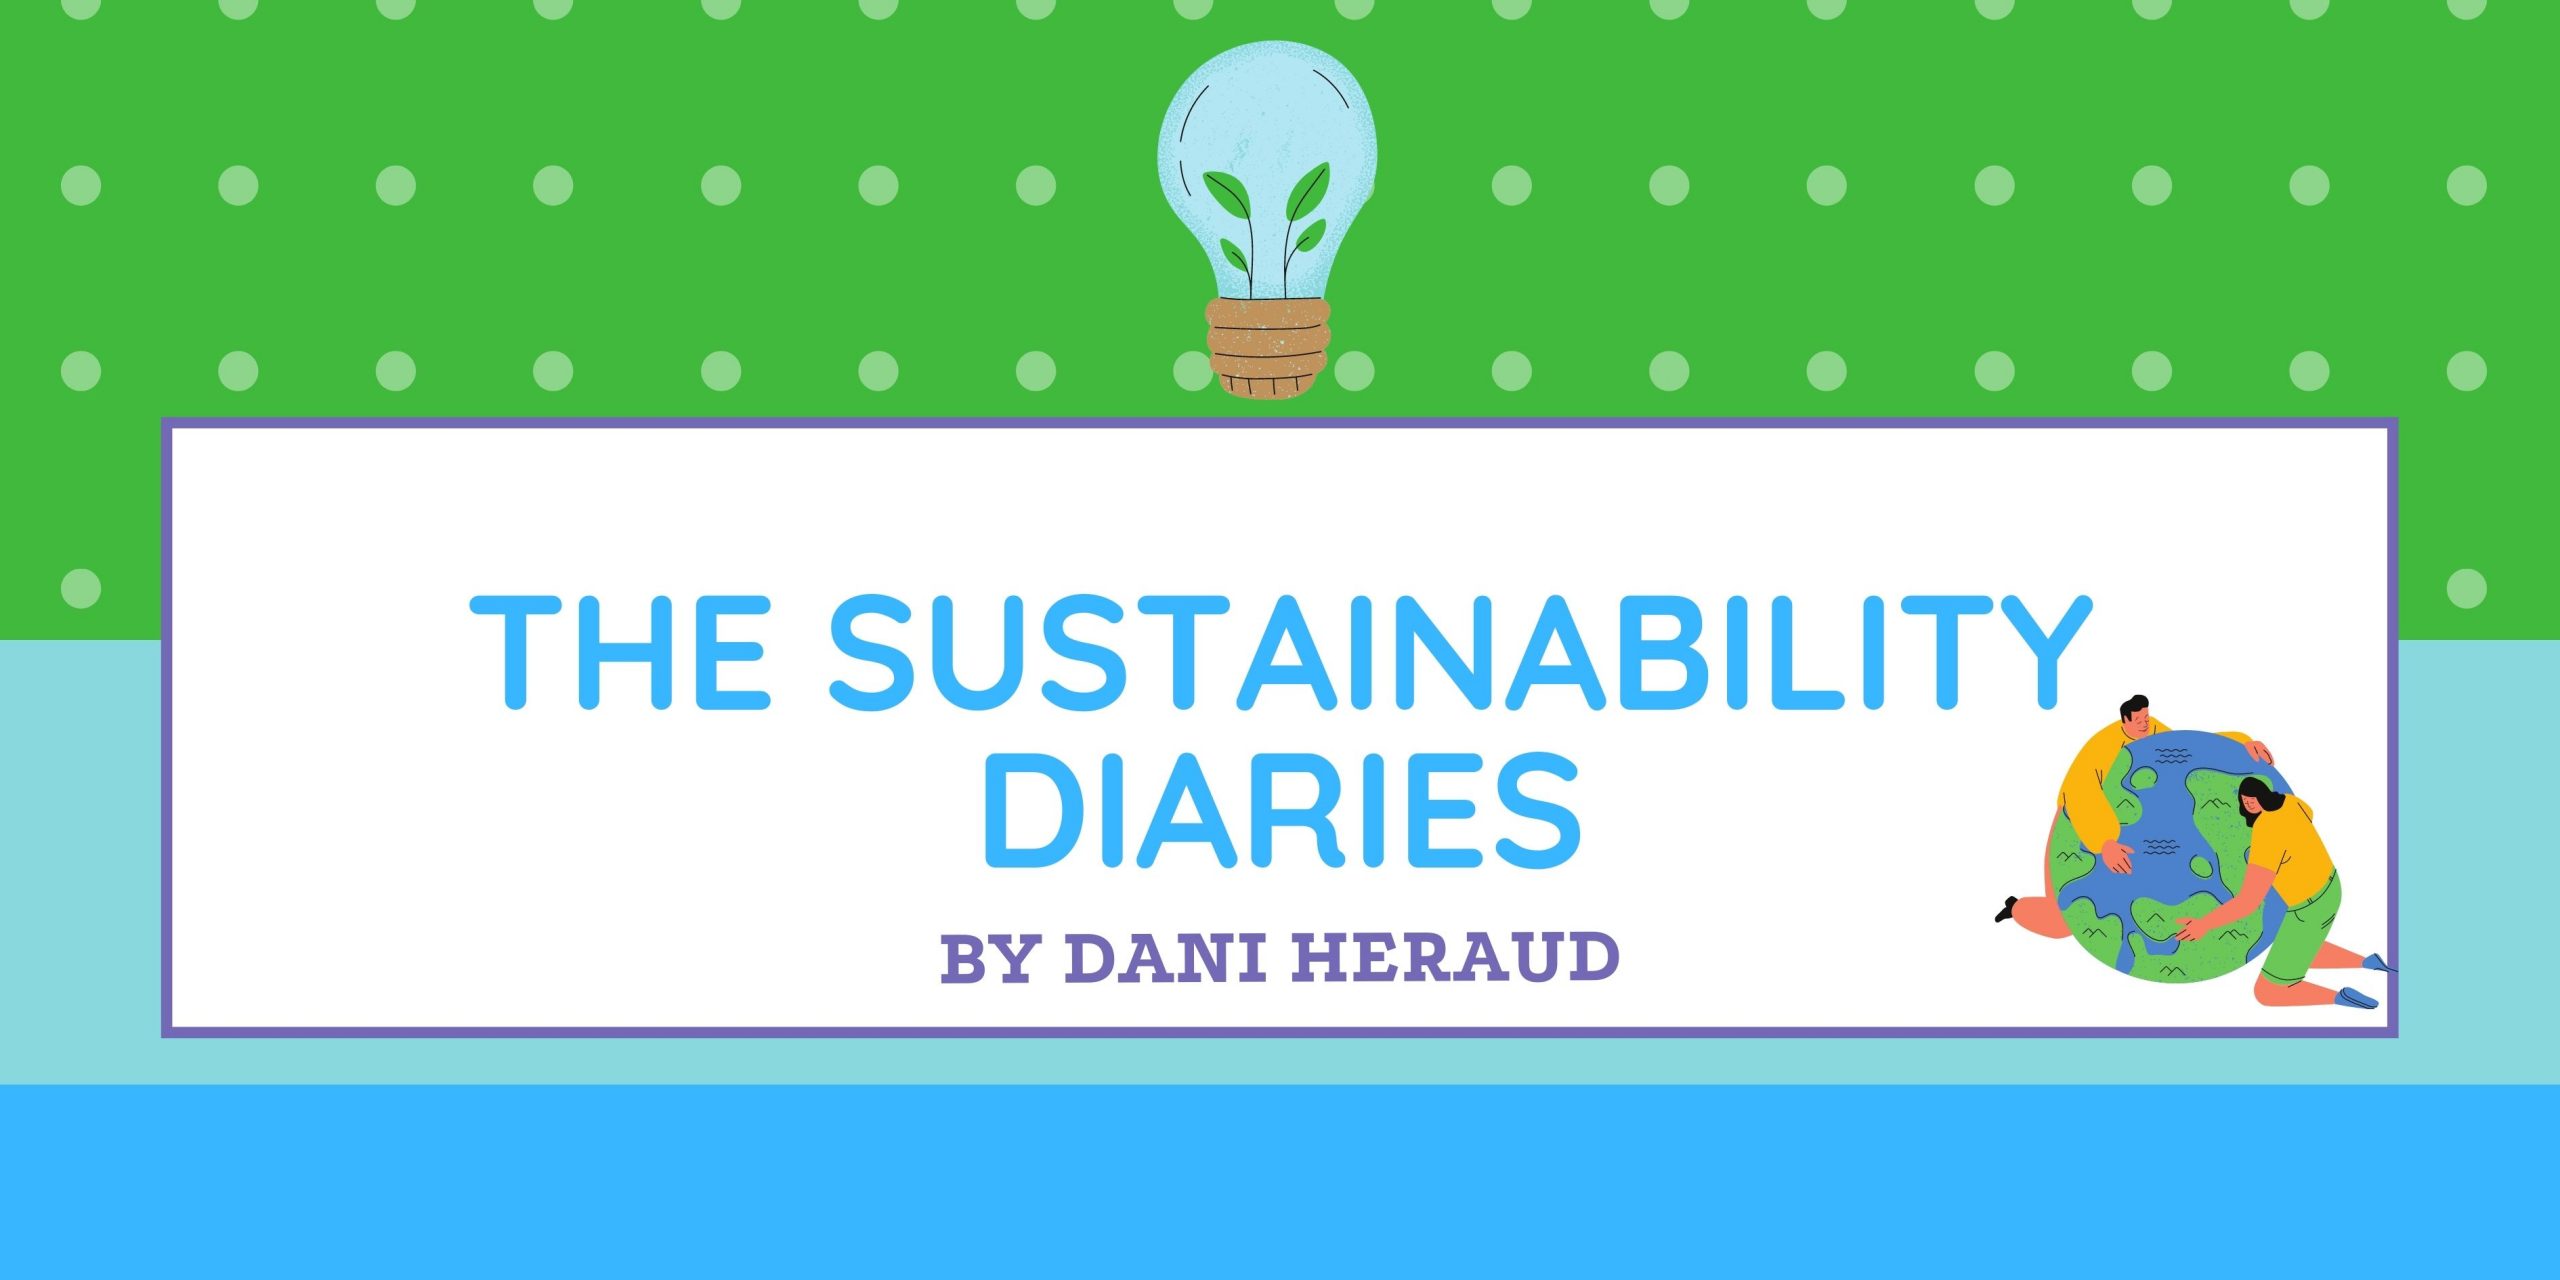 The Sustainability Diaries